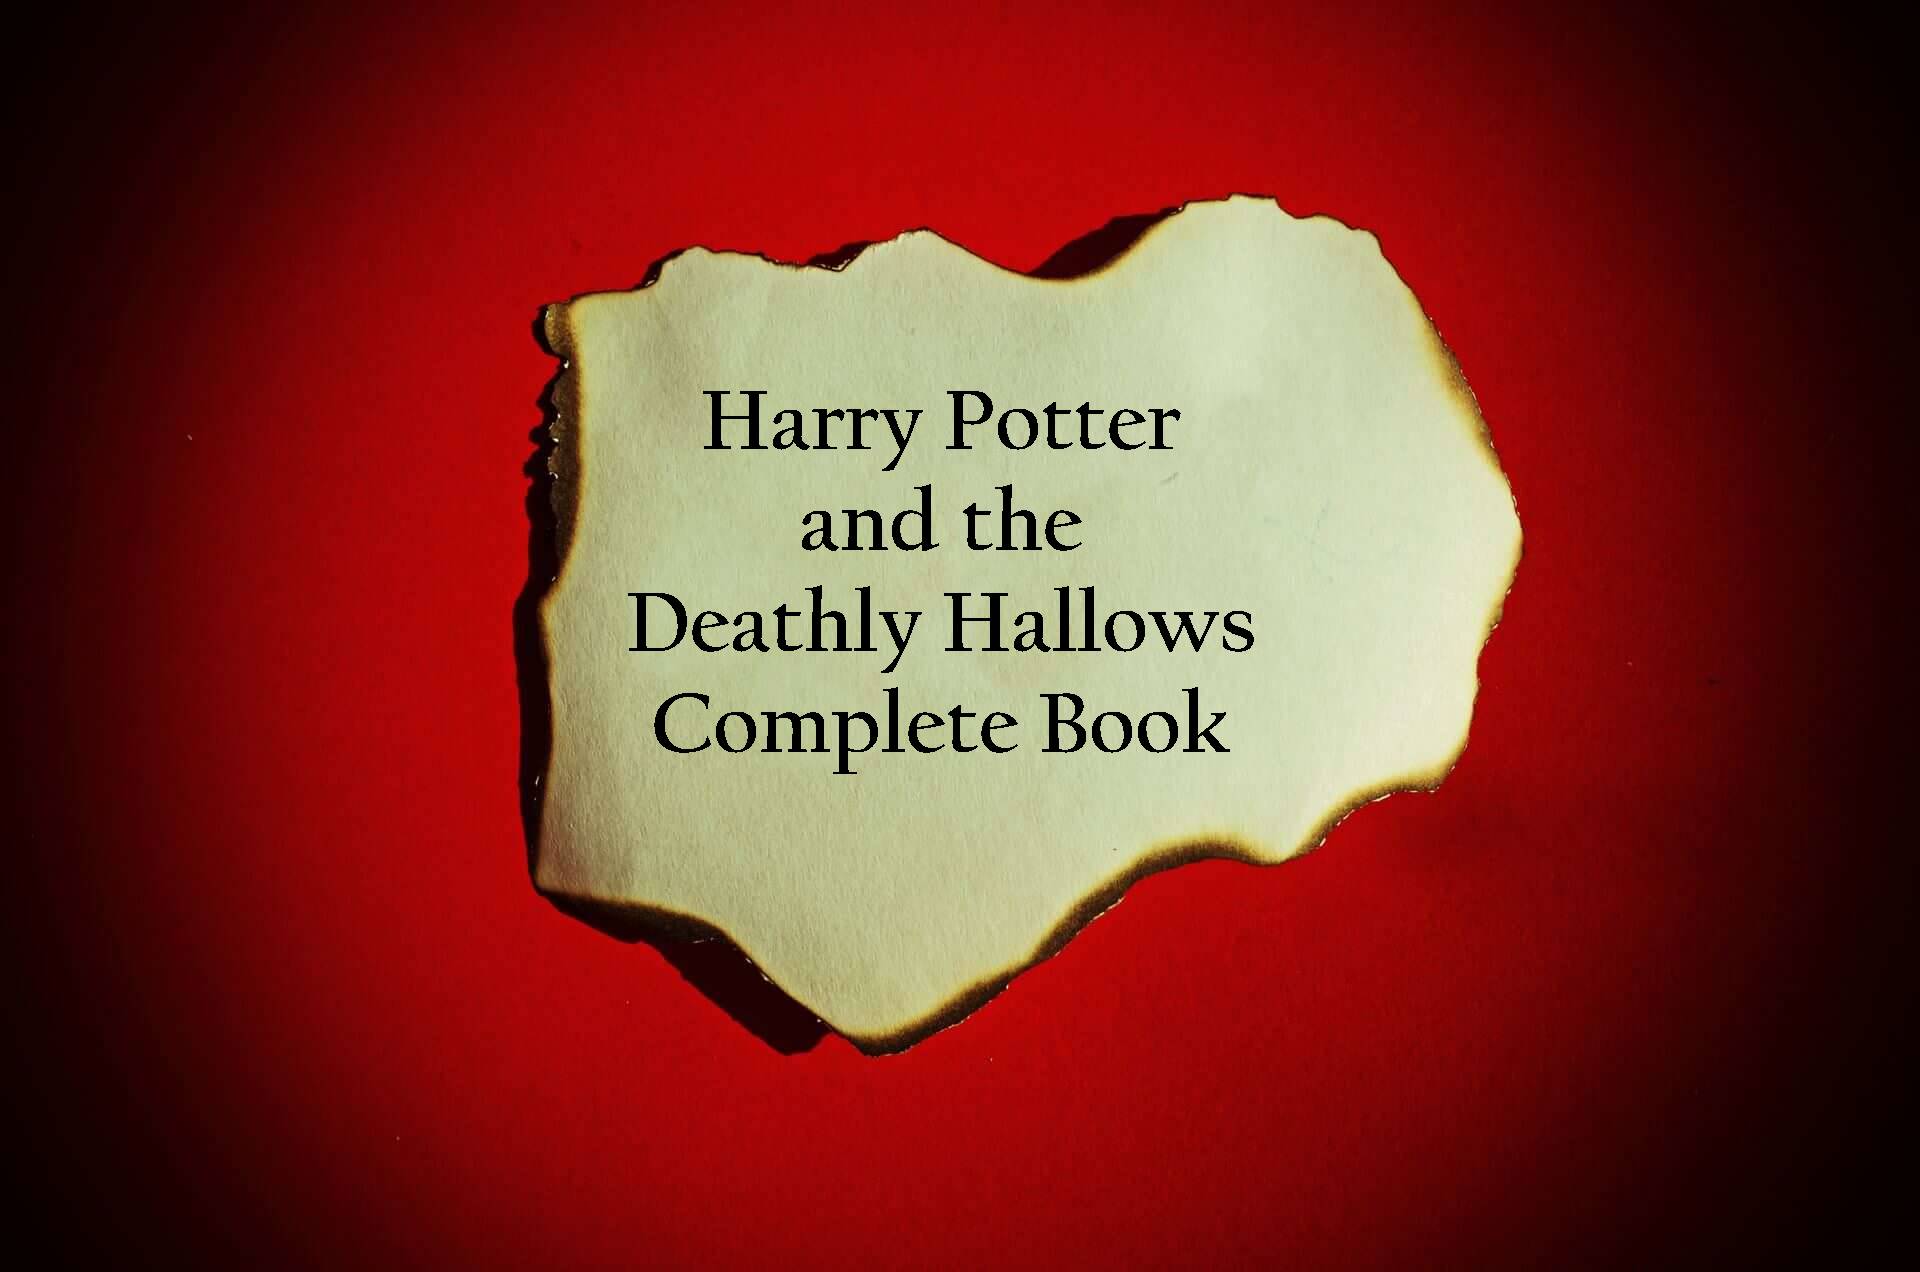 listen to harry potter and the deathly hallows audiobook